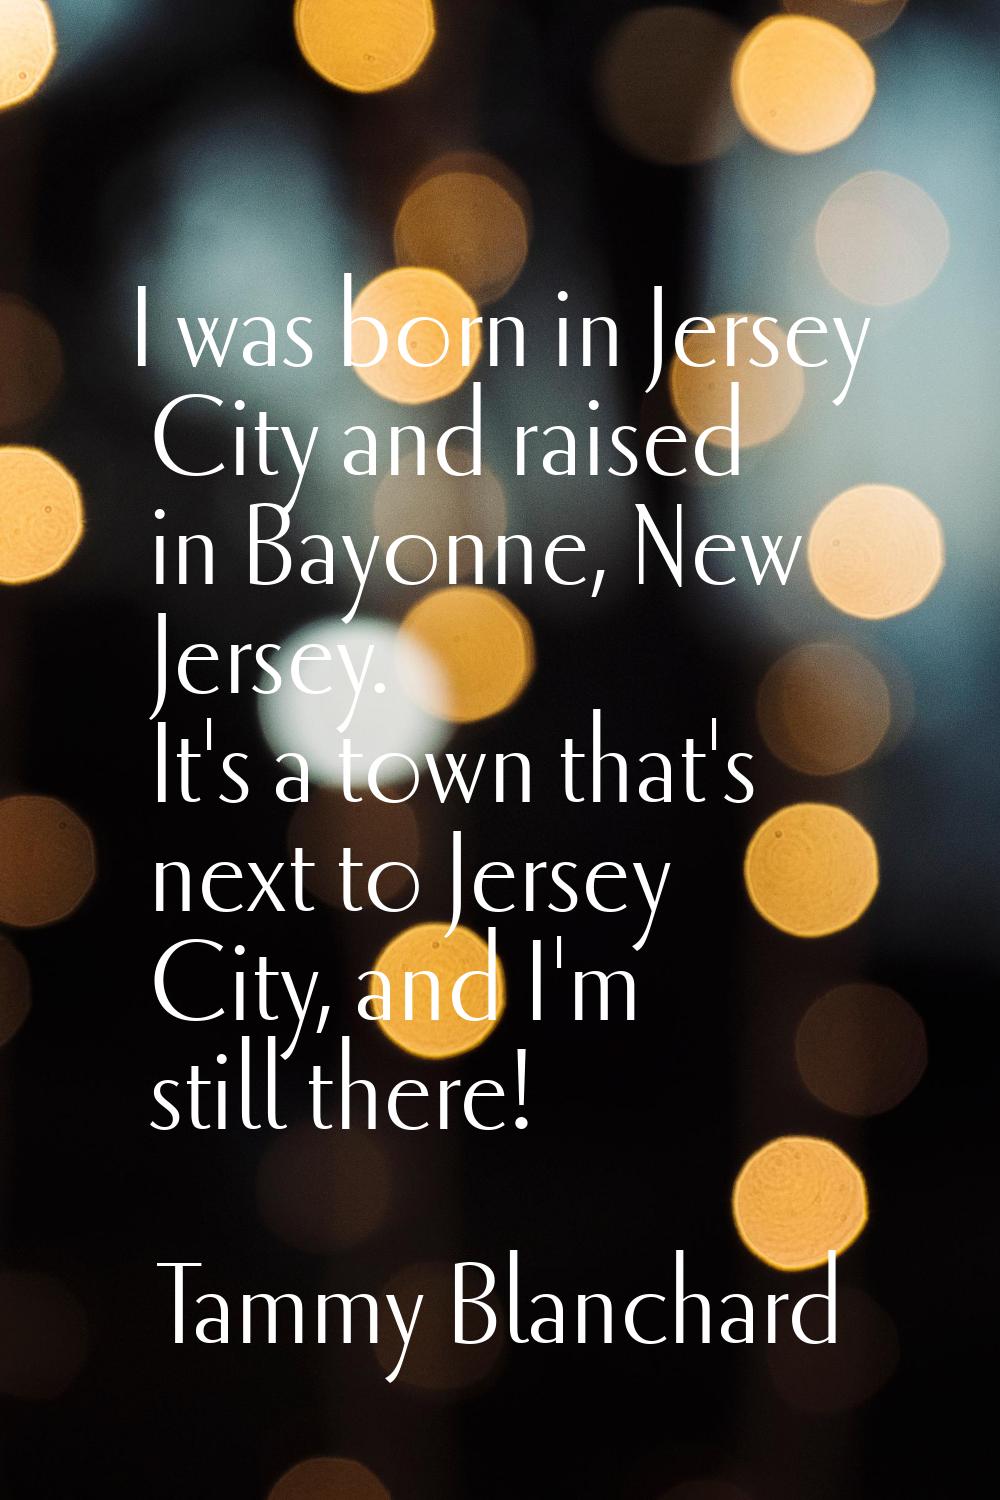 I was born in Jersey City and raised in Bayonne, New Jersey. It's a town that's next to Jersey City